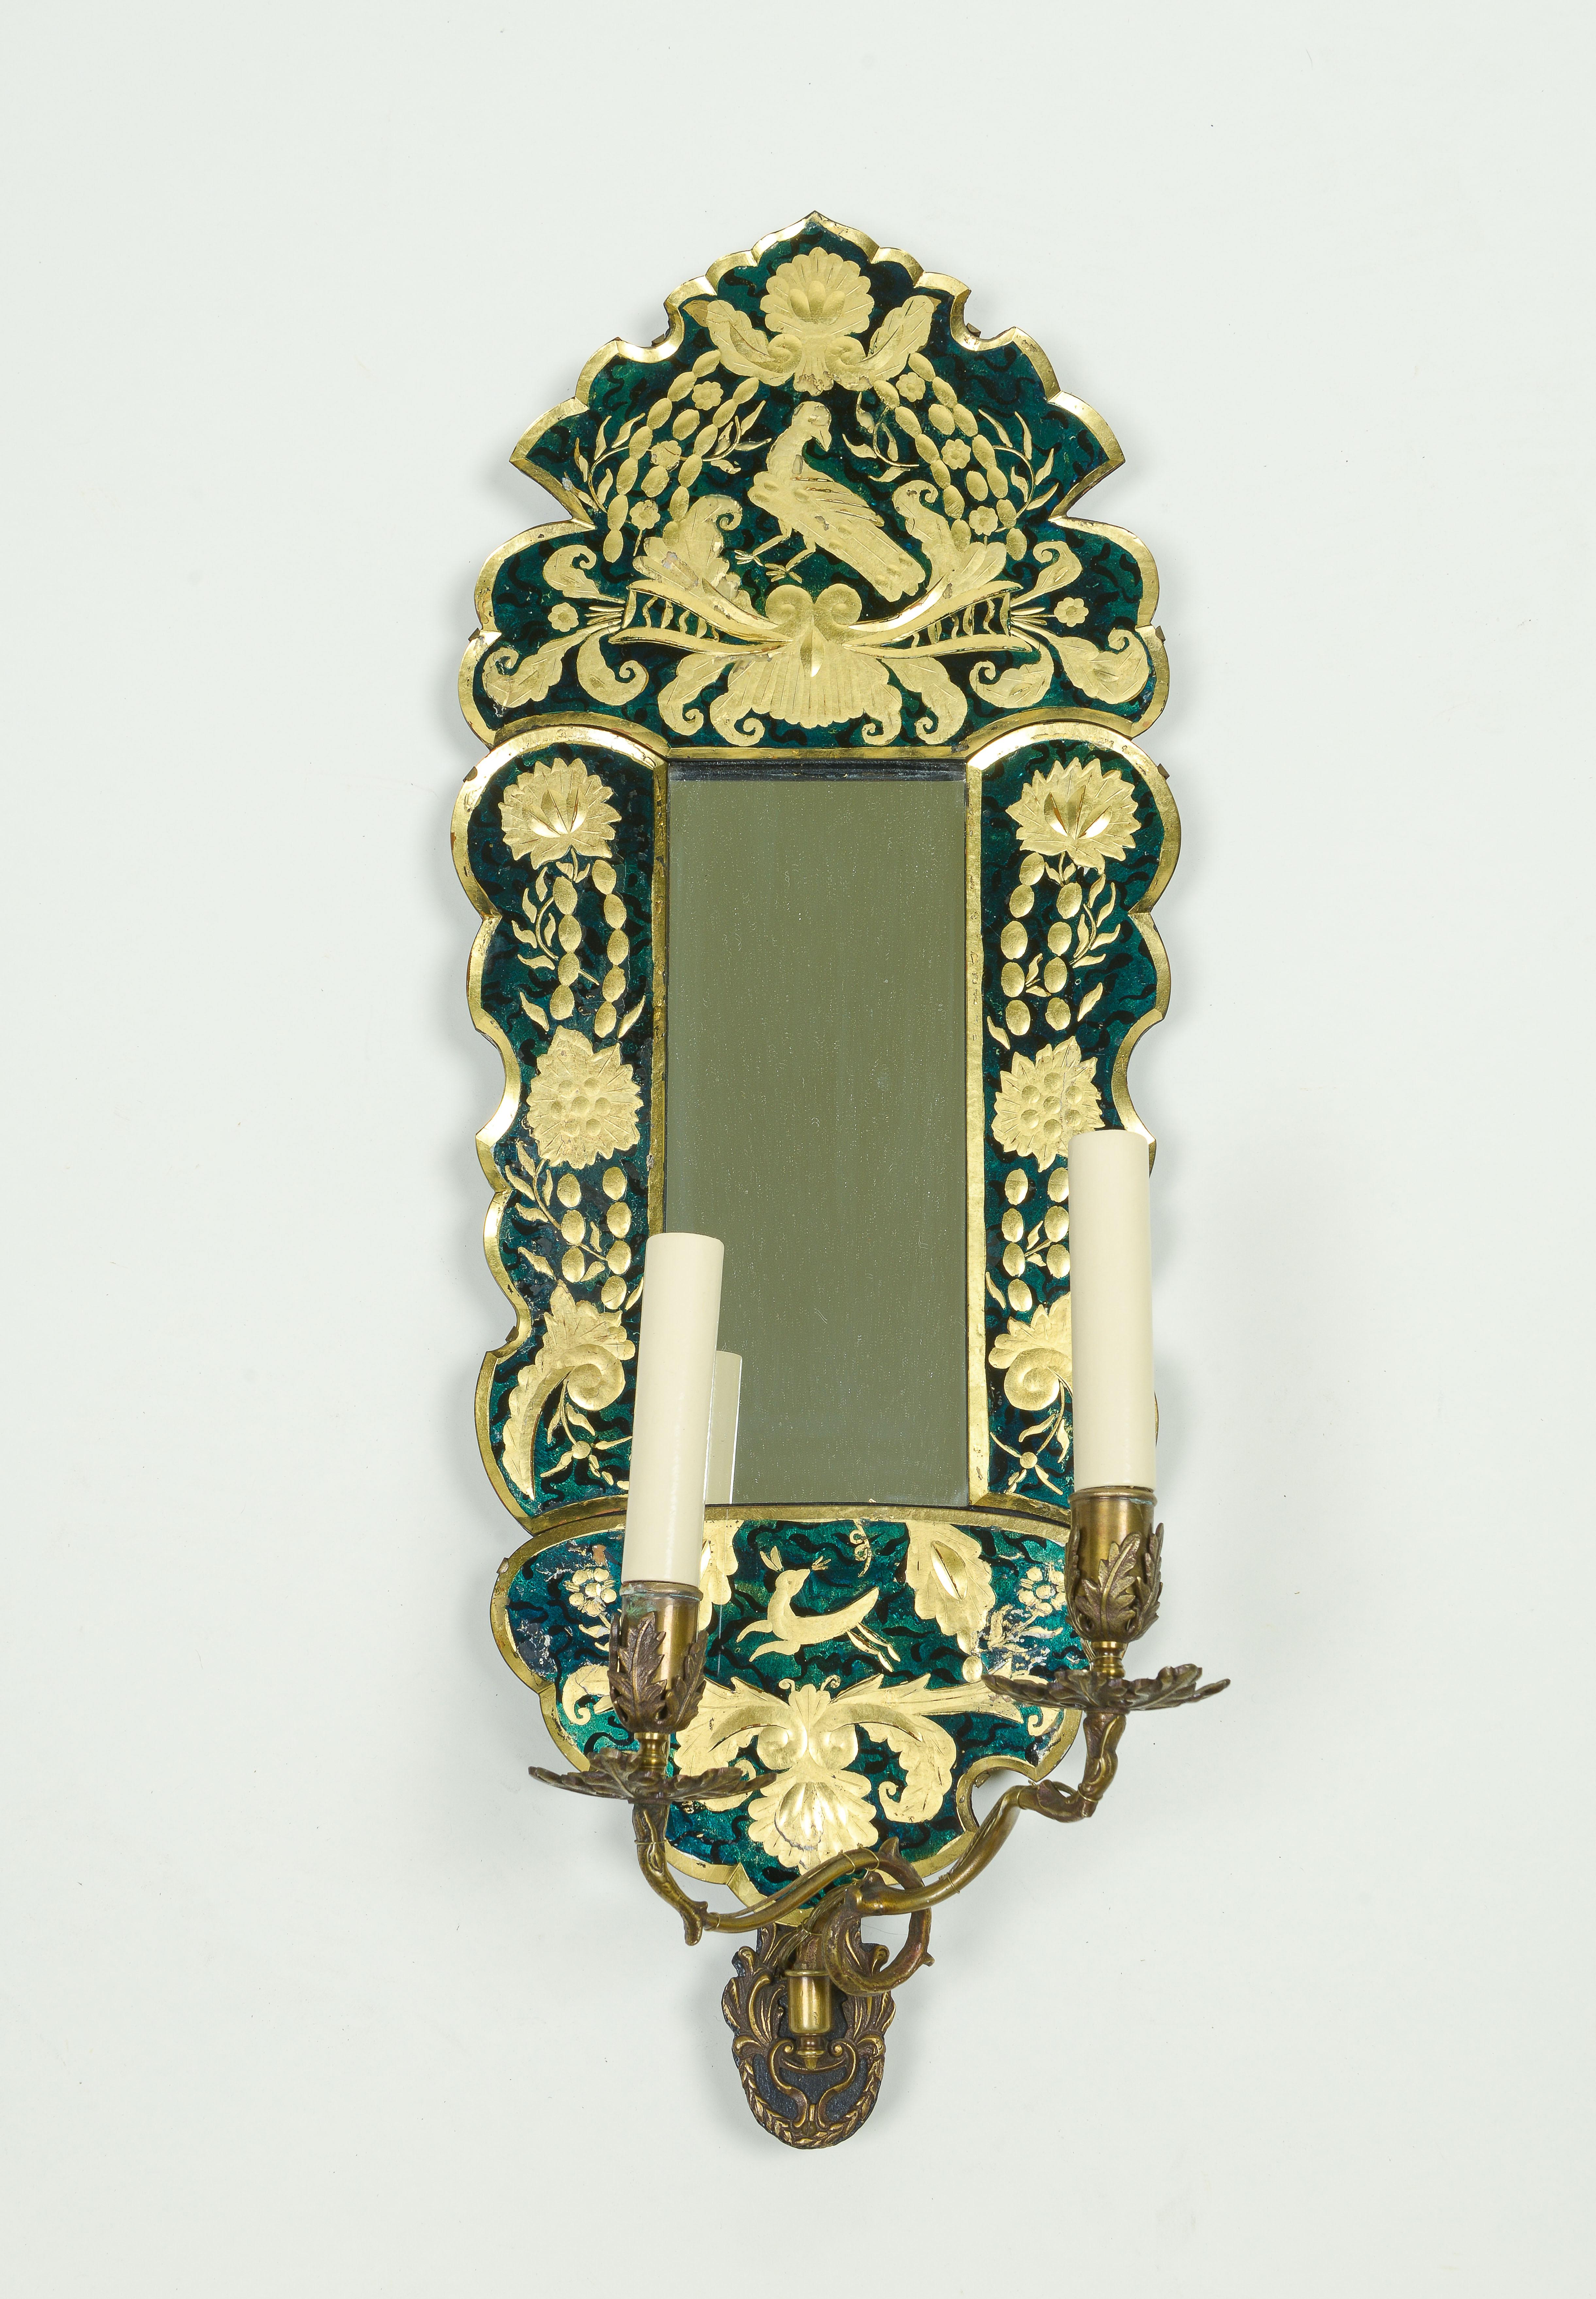 Each with rectangular mirror plate within a green ground verre eglomise scalloped and arched surround overpainted with gilt decoration incorporating birds, flowers and foliage; issuing two brass electrified candlearms with ivory candle sleeves.